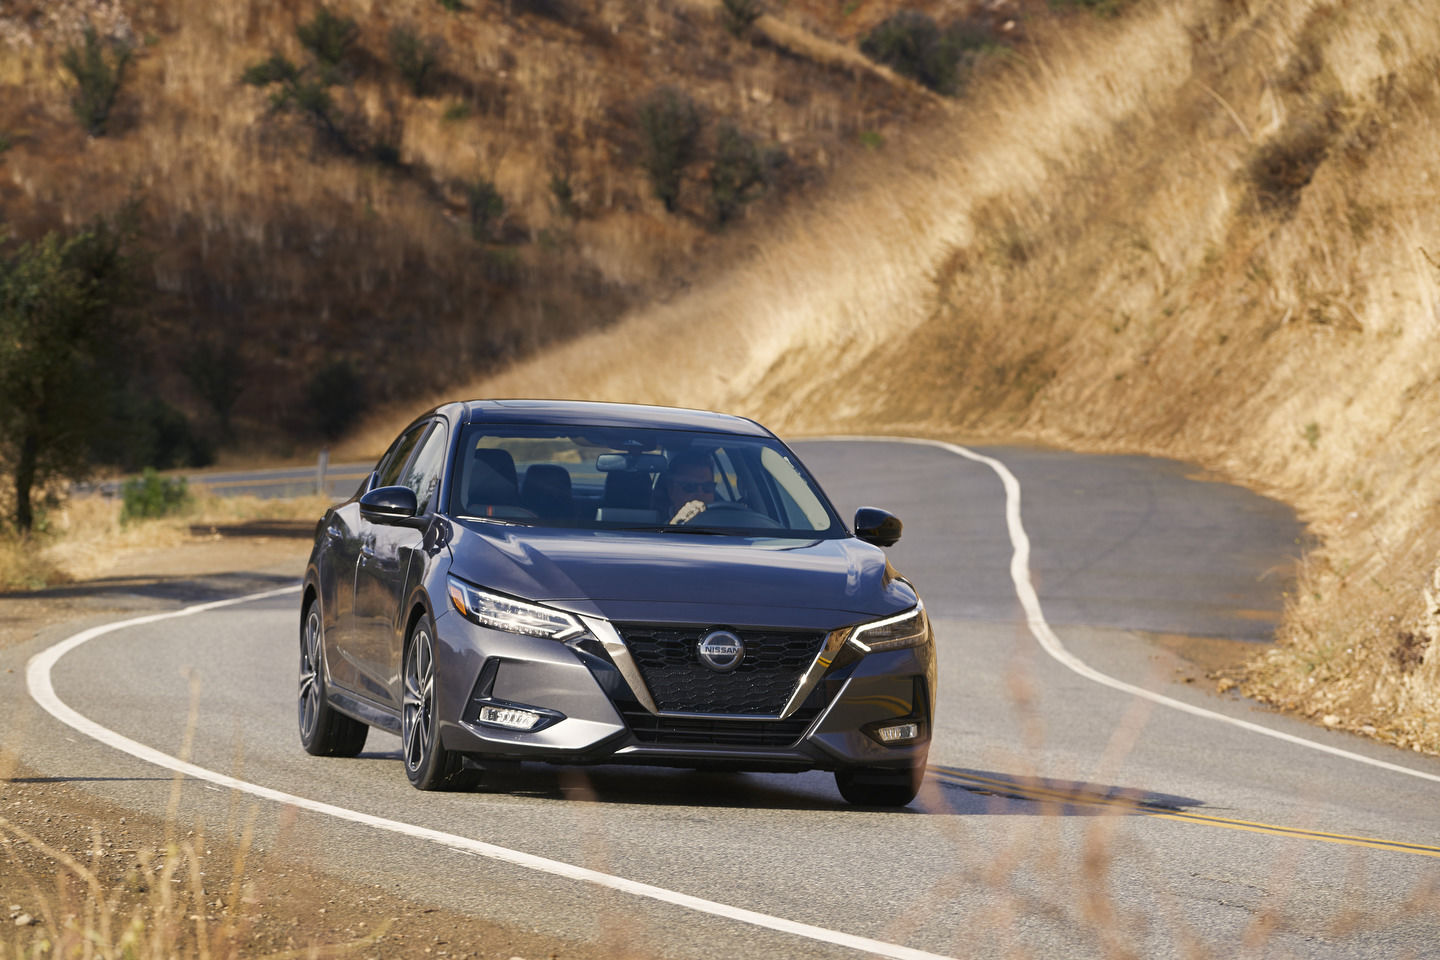 Why should you consider a pre-owned Nissan Sentra?